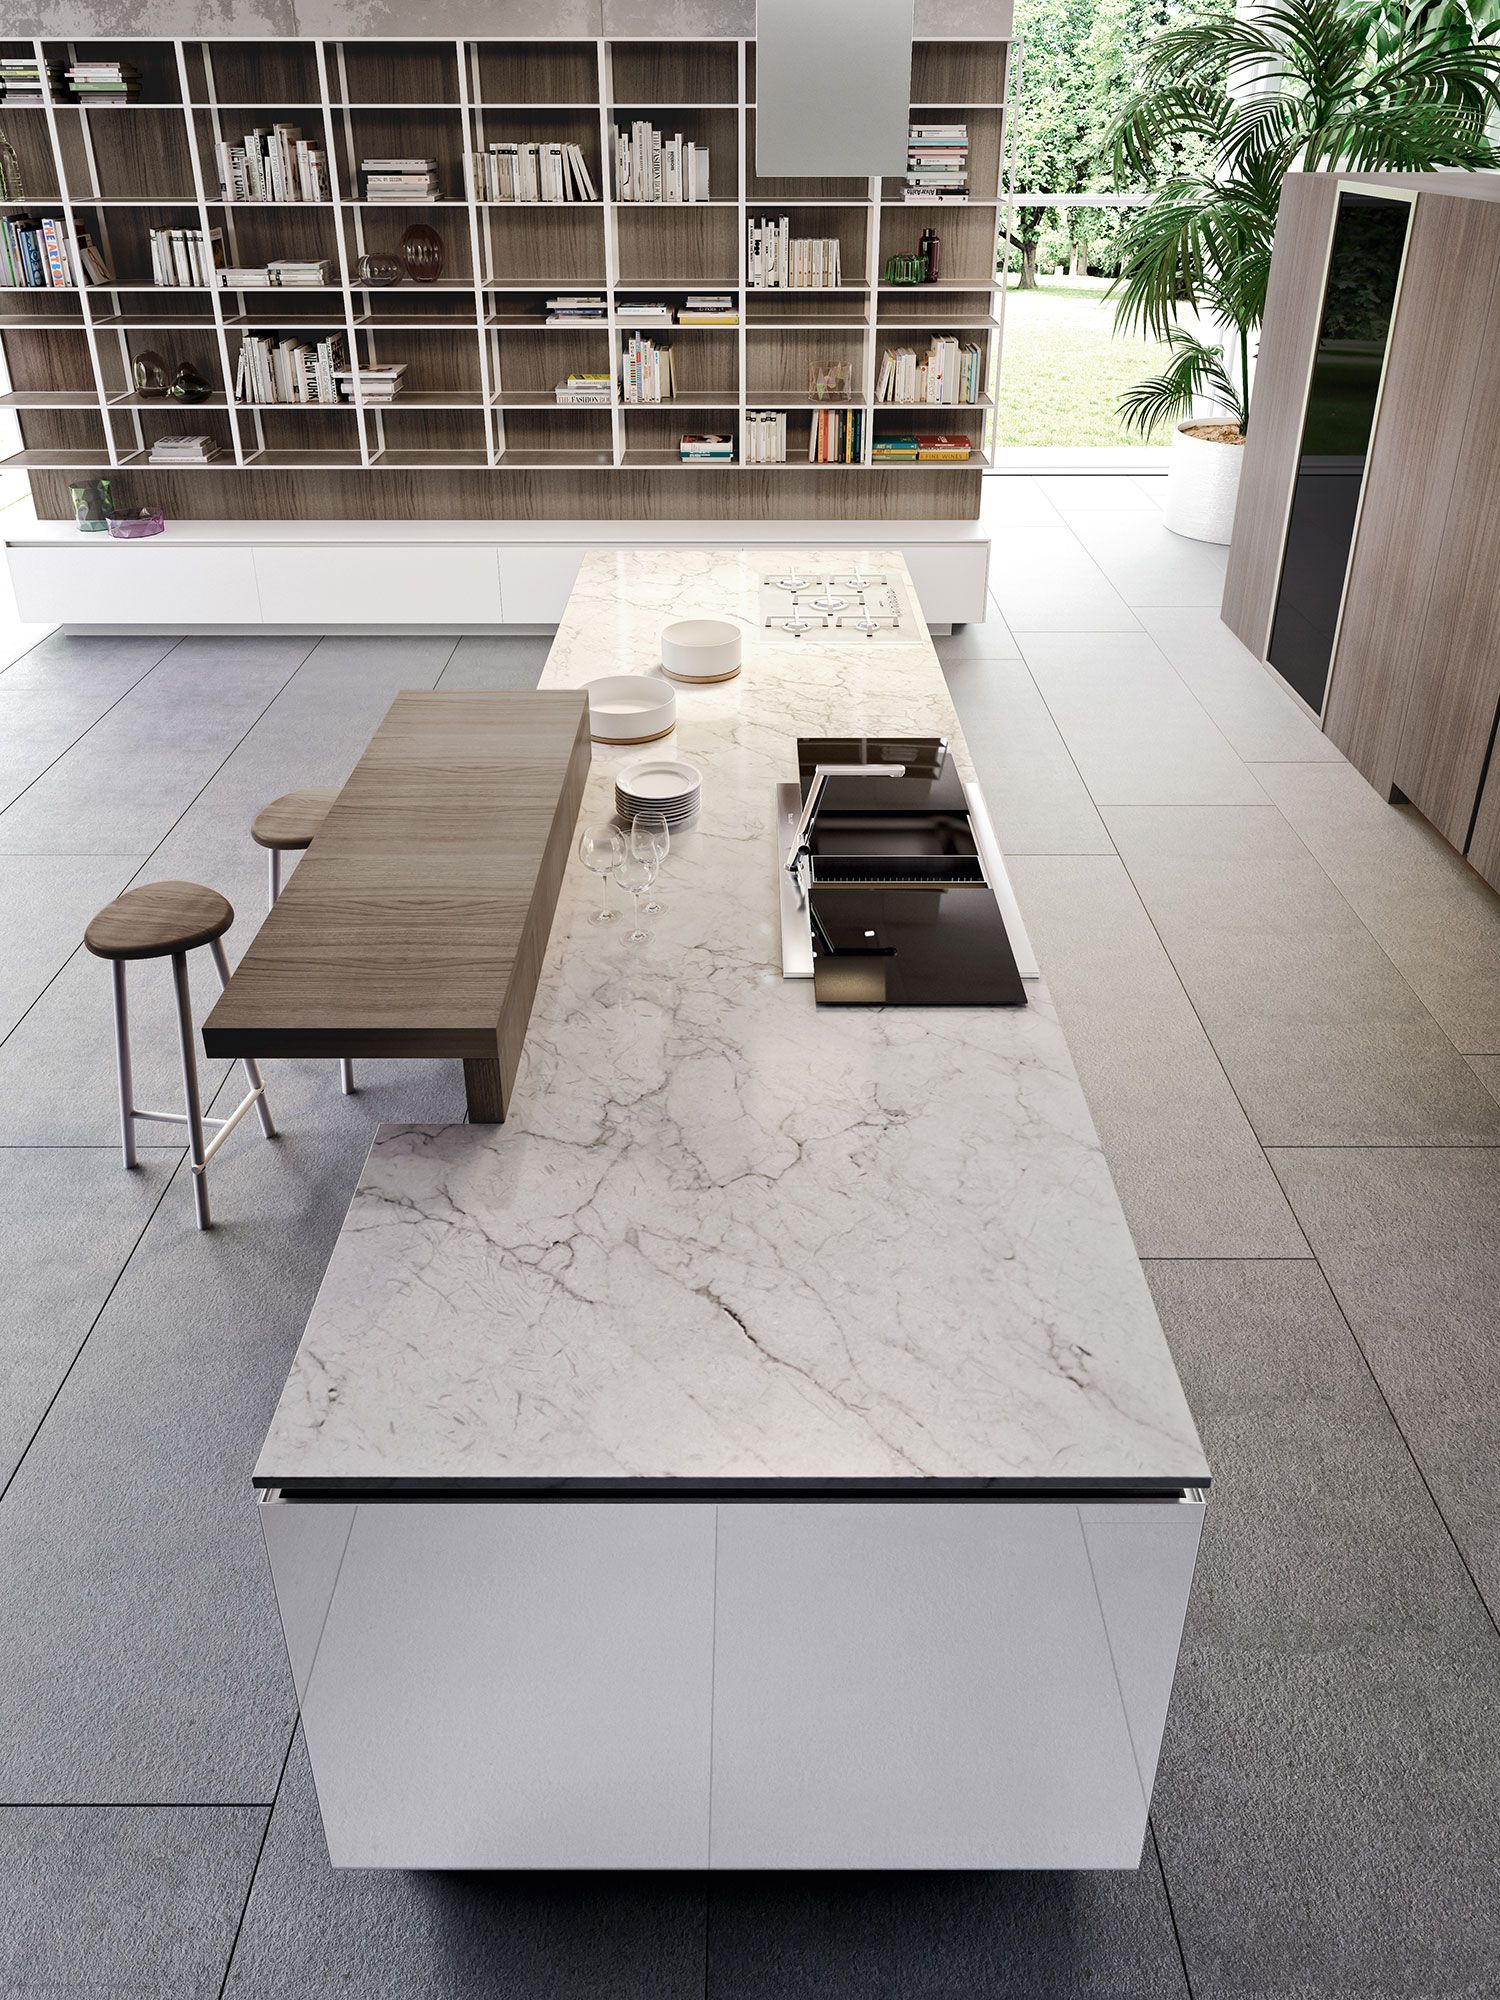 Marble-kitchen-island-countertop-along-with-wooden-breakfast-bar